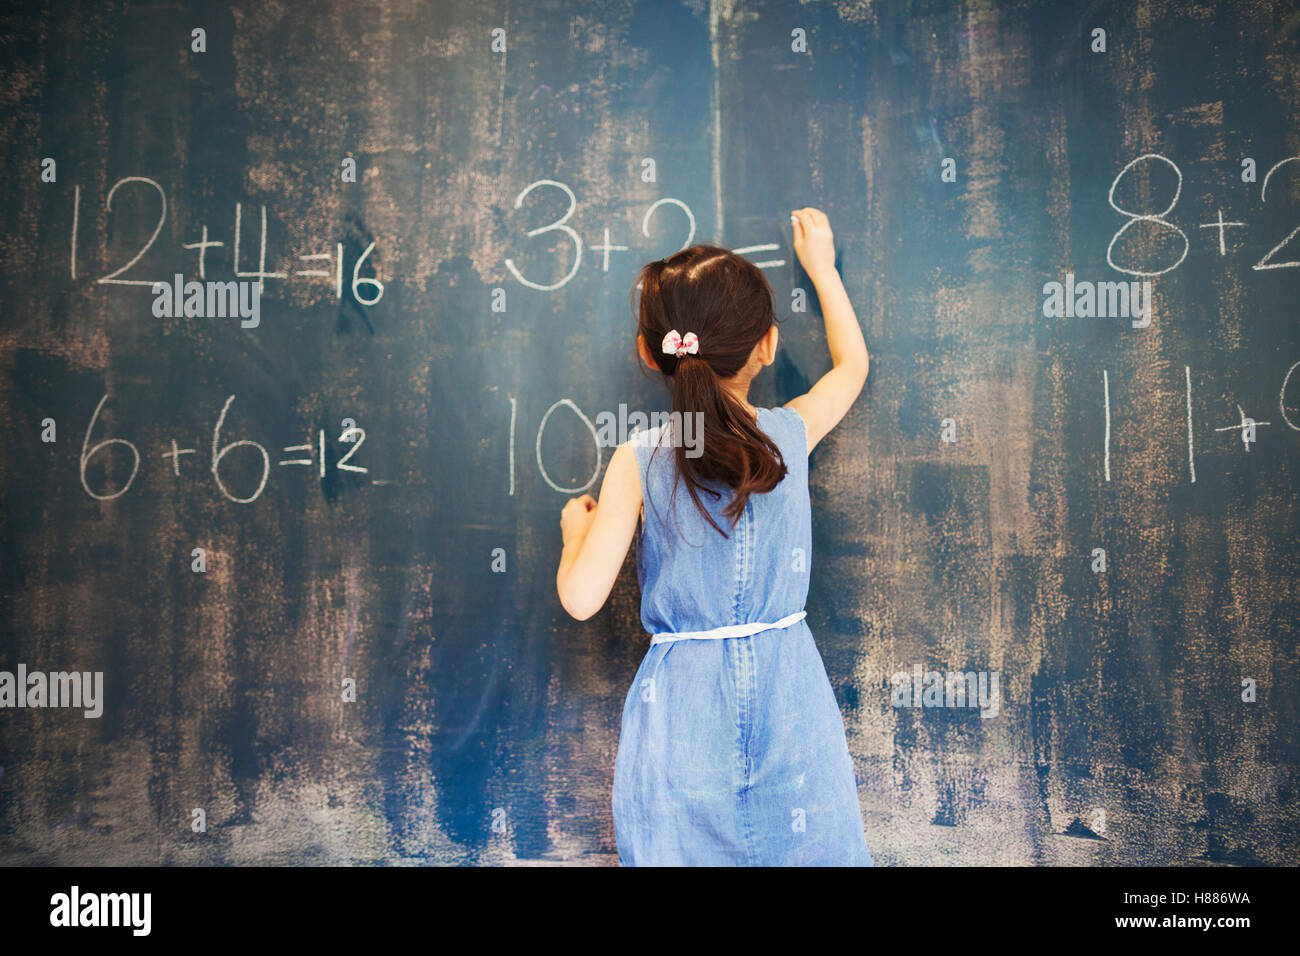 A group of children in school. A girl writing in chalk on a chalkboard. Stock Photo